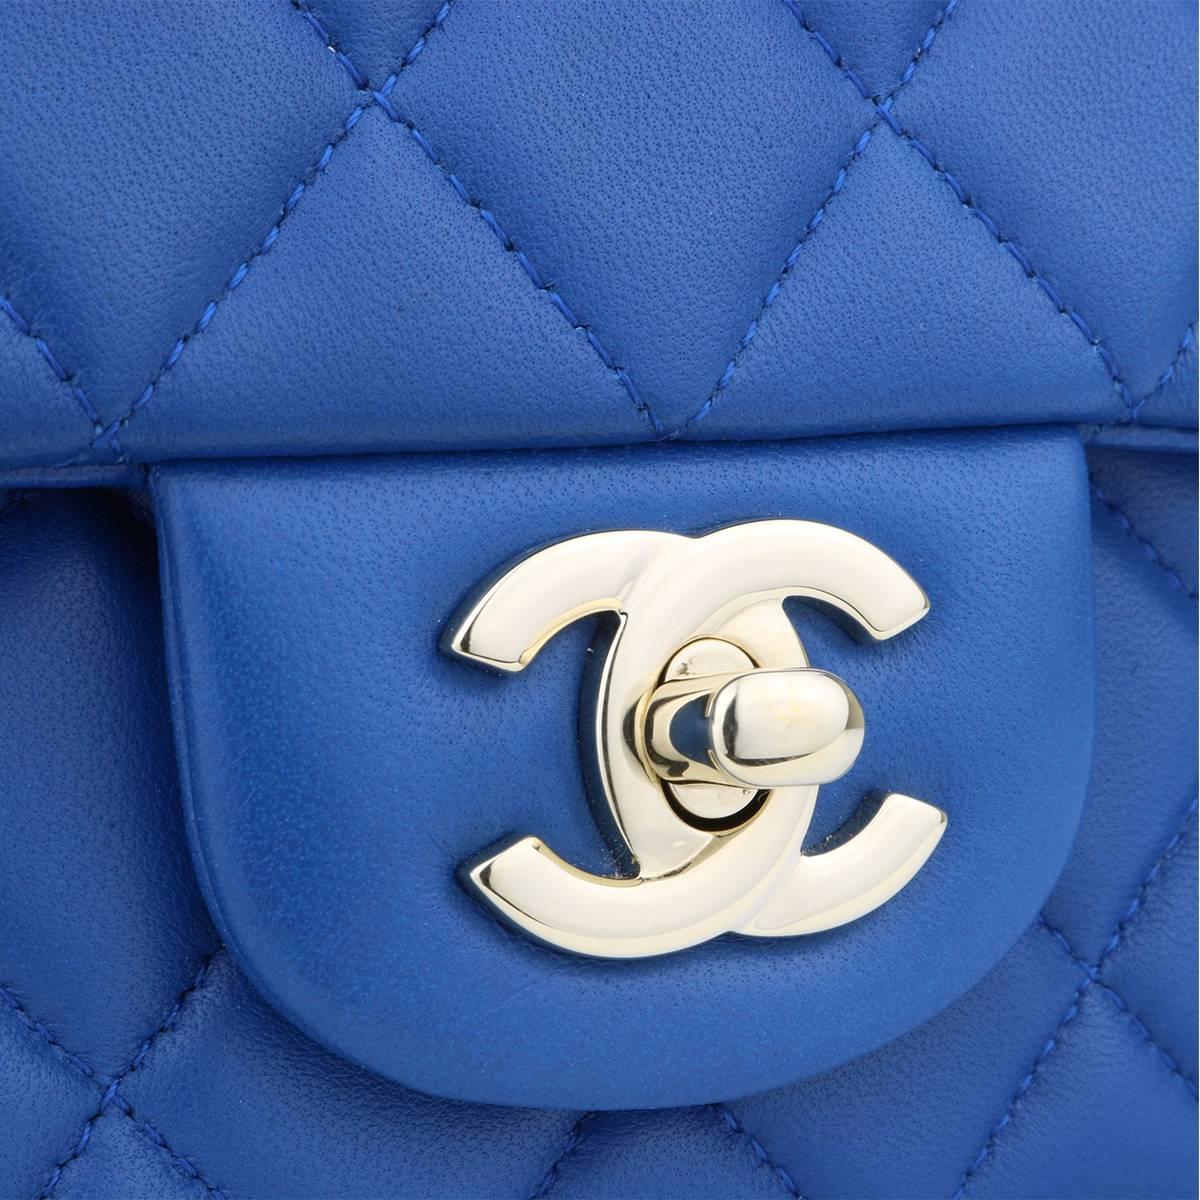 Authentic CHANEL Rectangular Mini Blue Lambskin with Light Gold Hardware 2017

This stunning bag is still in mint condition, the bag still holds the original shape and the hardware still shiny. Leather still smells fresh as if new. A truly stunning